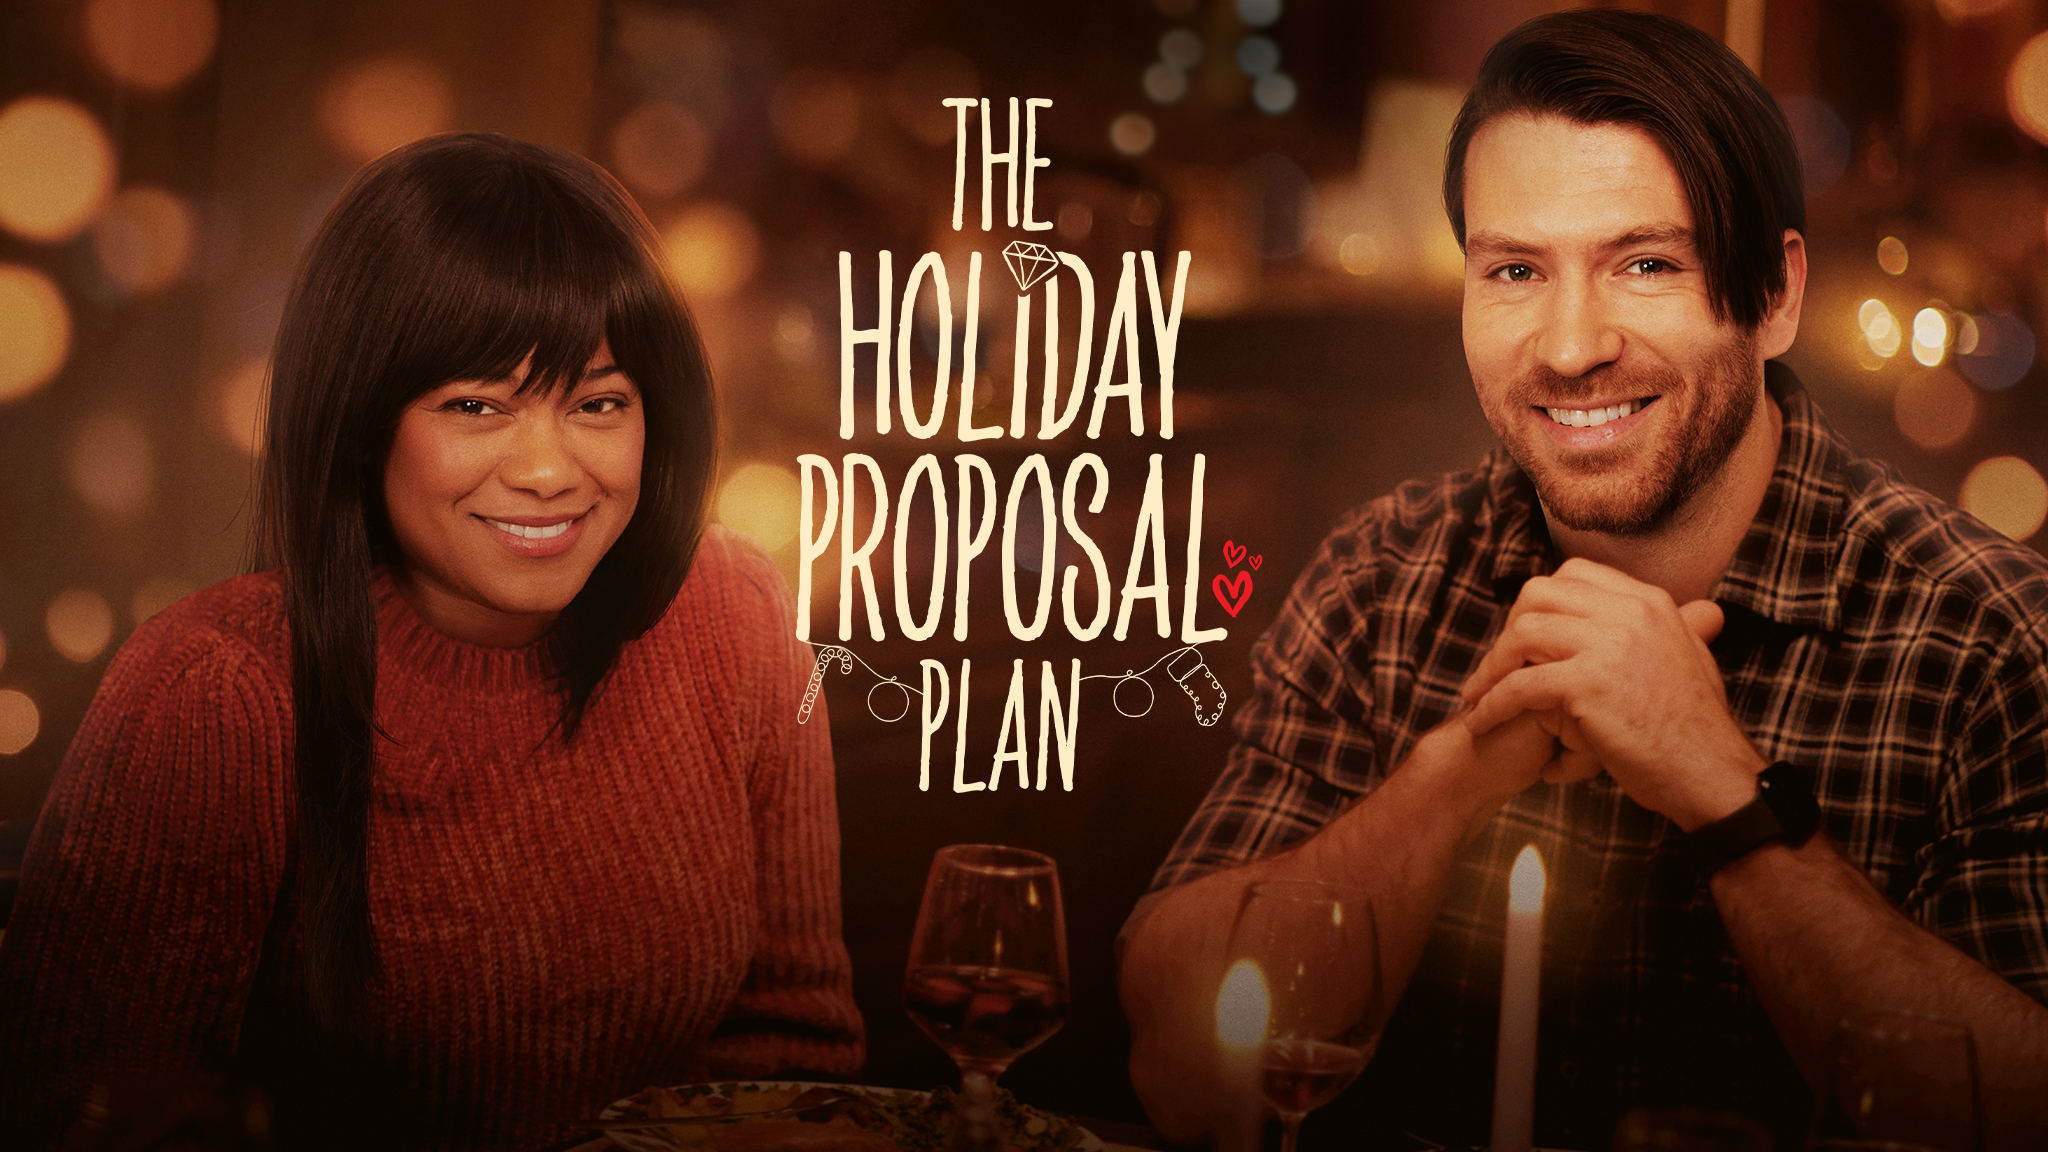 How to watch and stream The Proposal Spot - 2023 on Roku